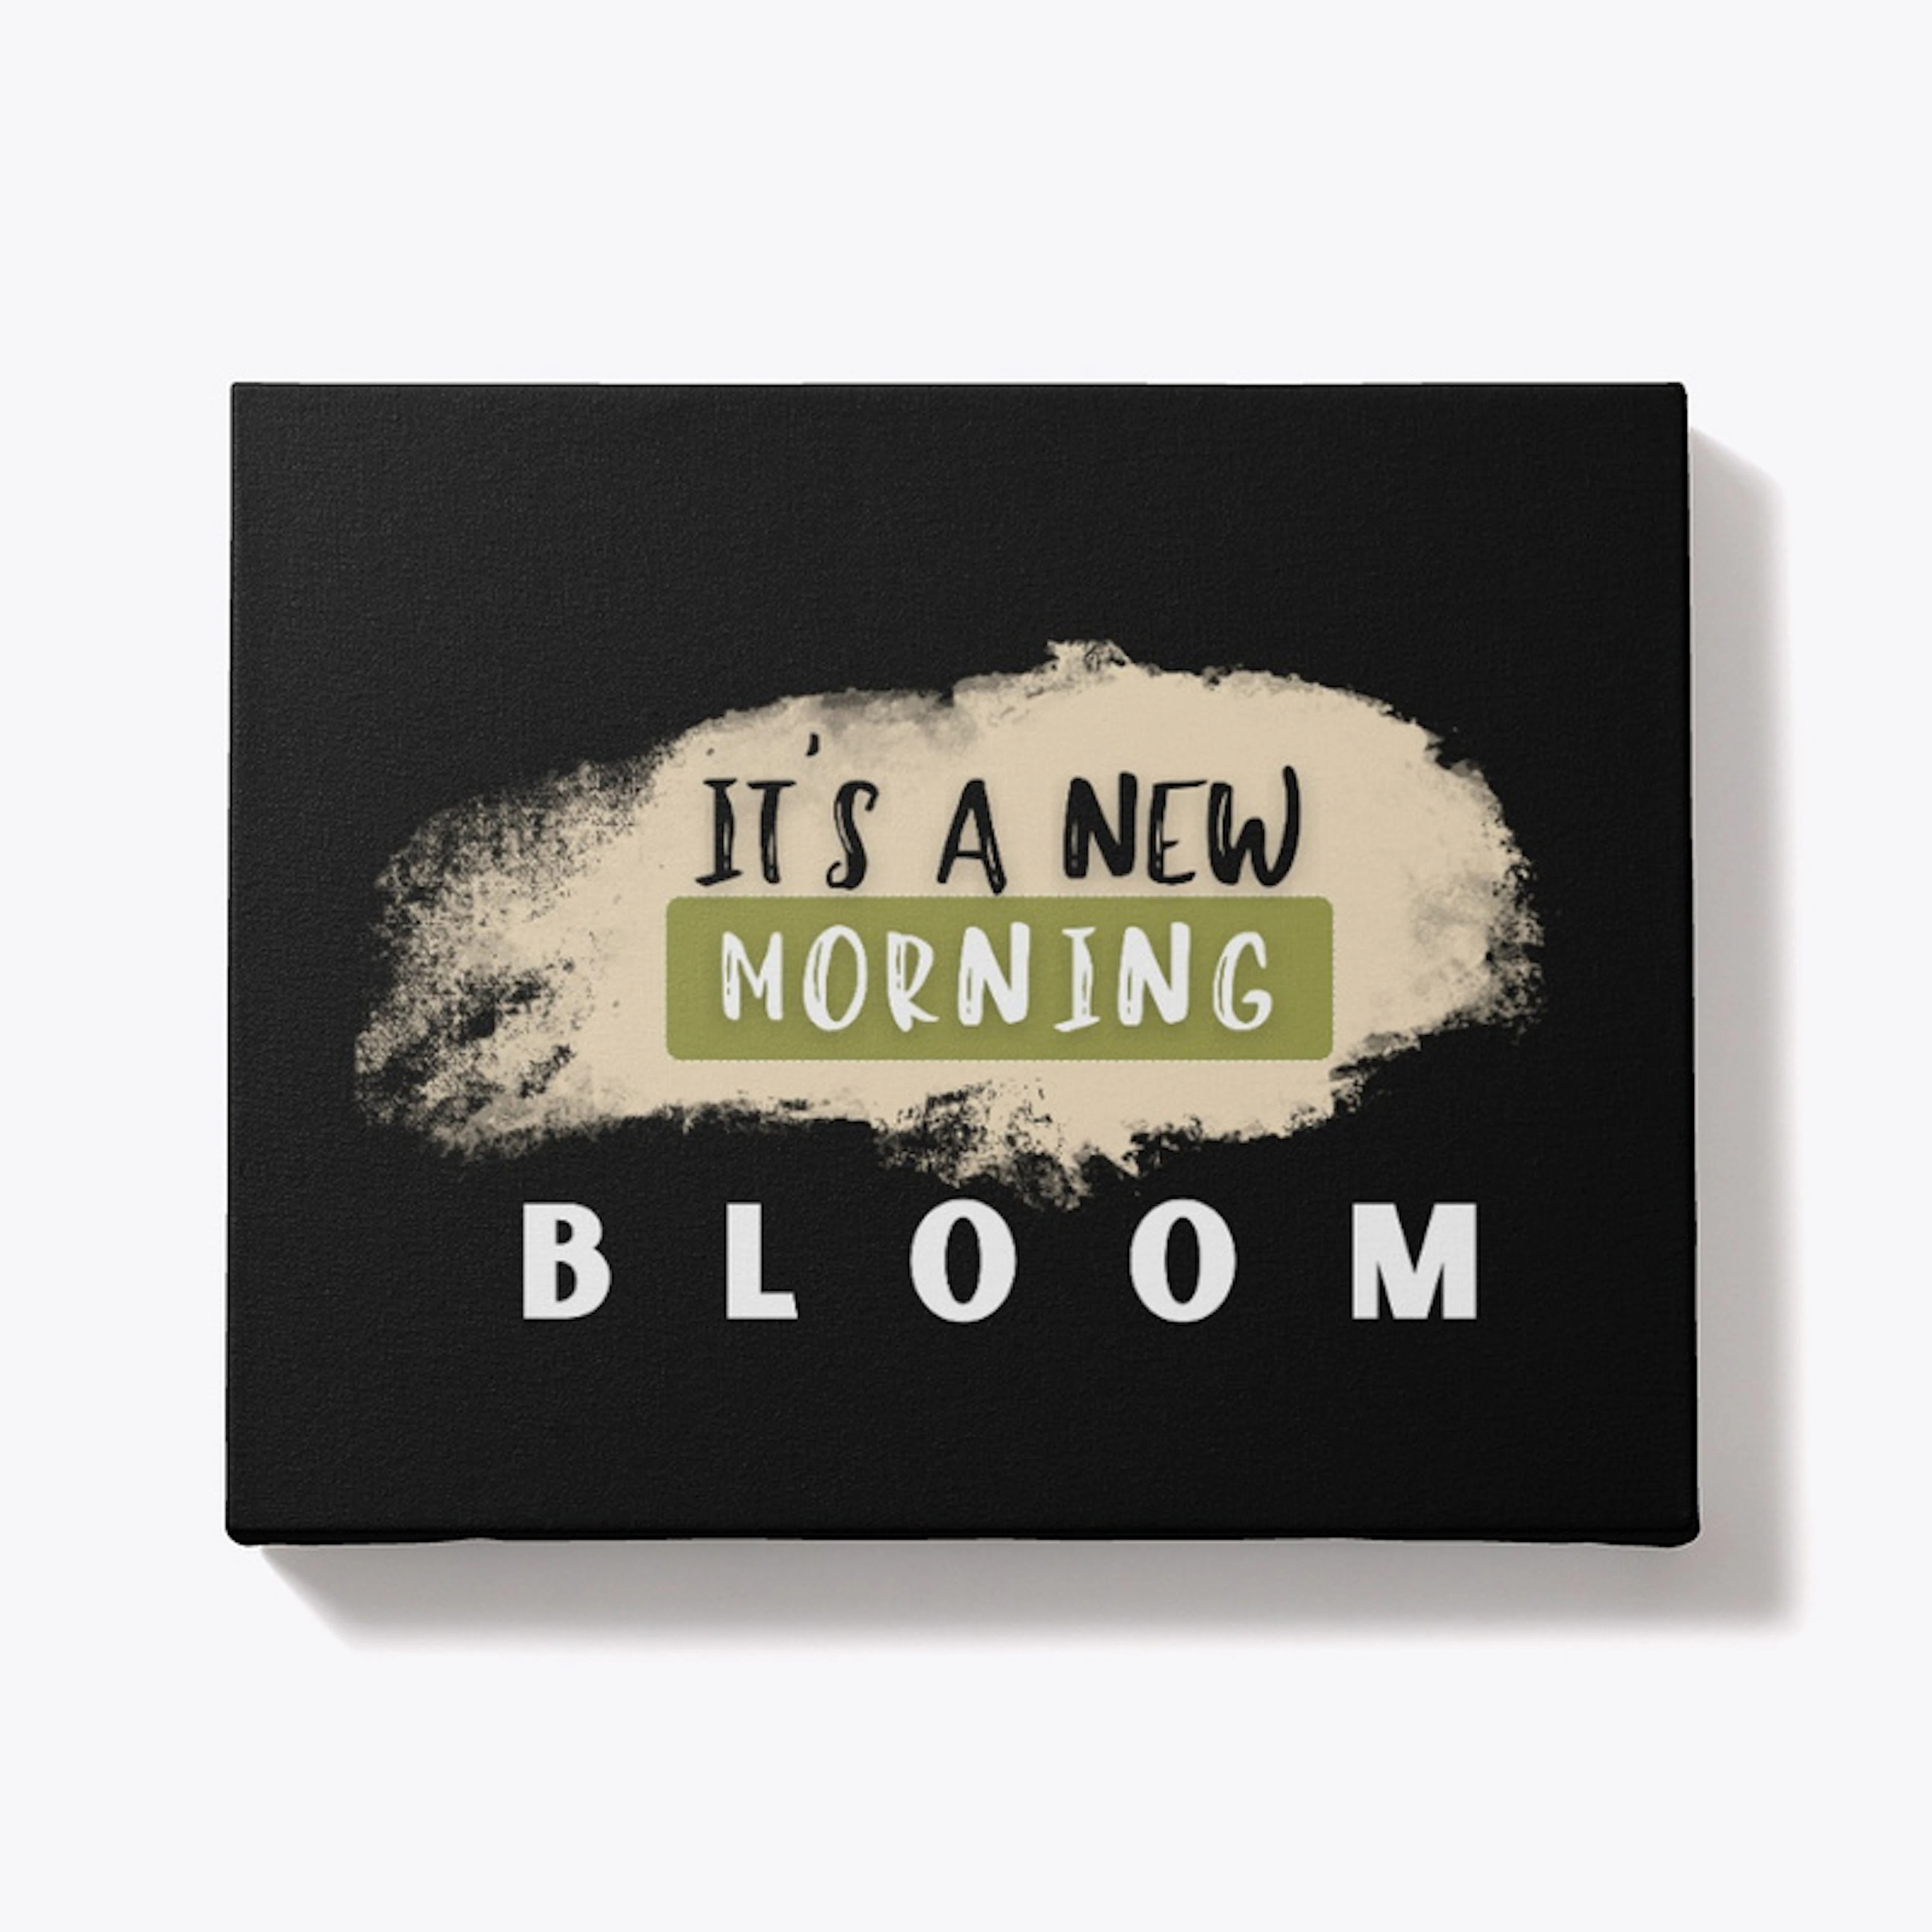 Bloom (It's A New Morning)